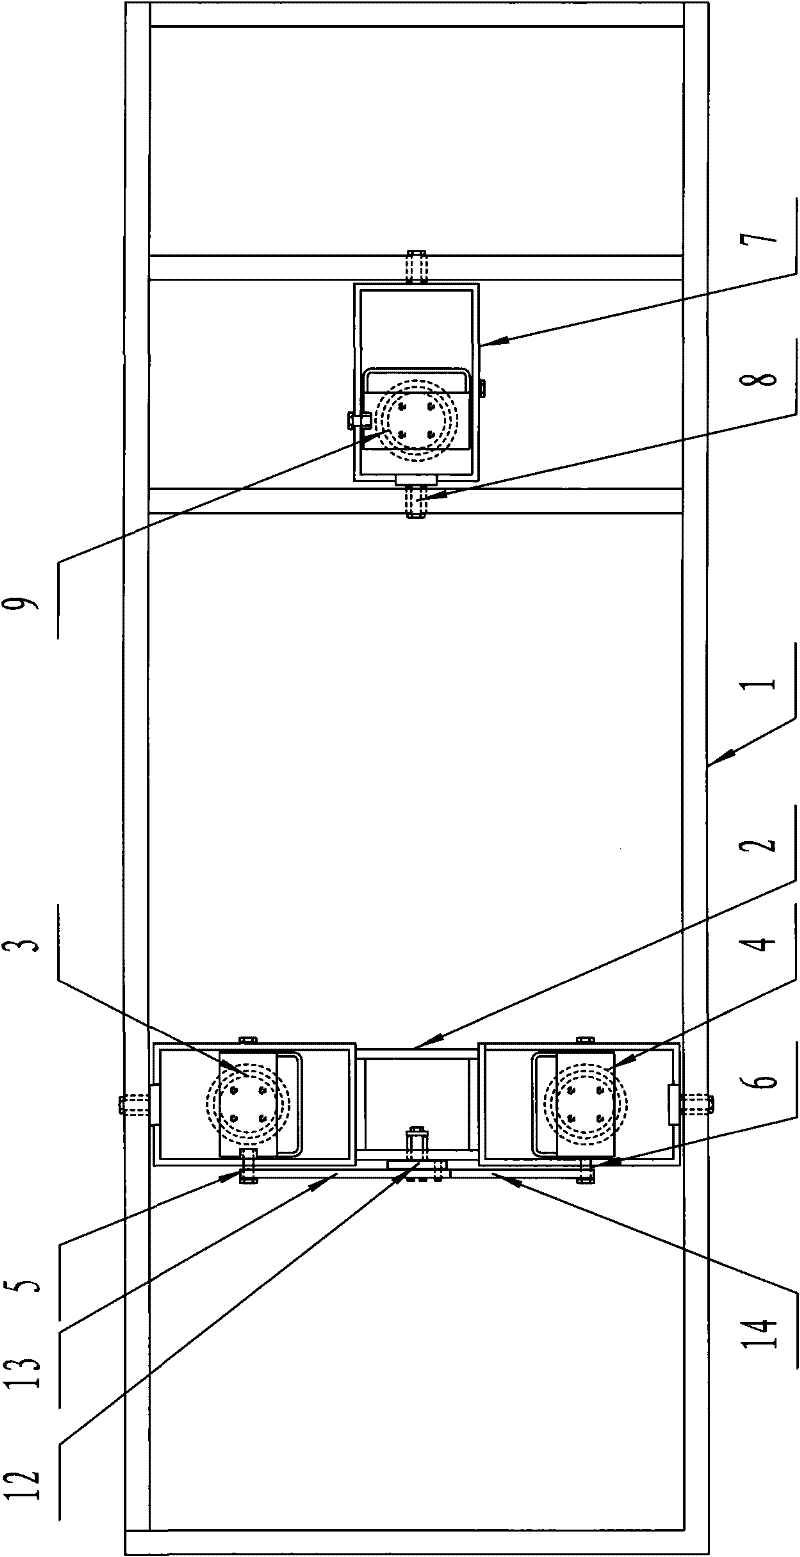 Lateral tilting device for electric bed